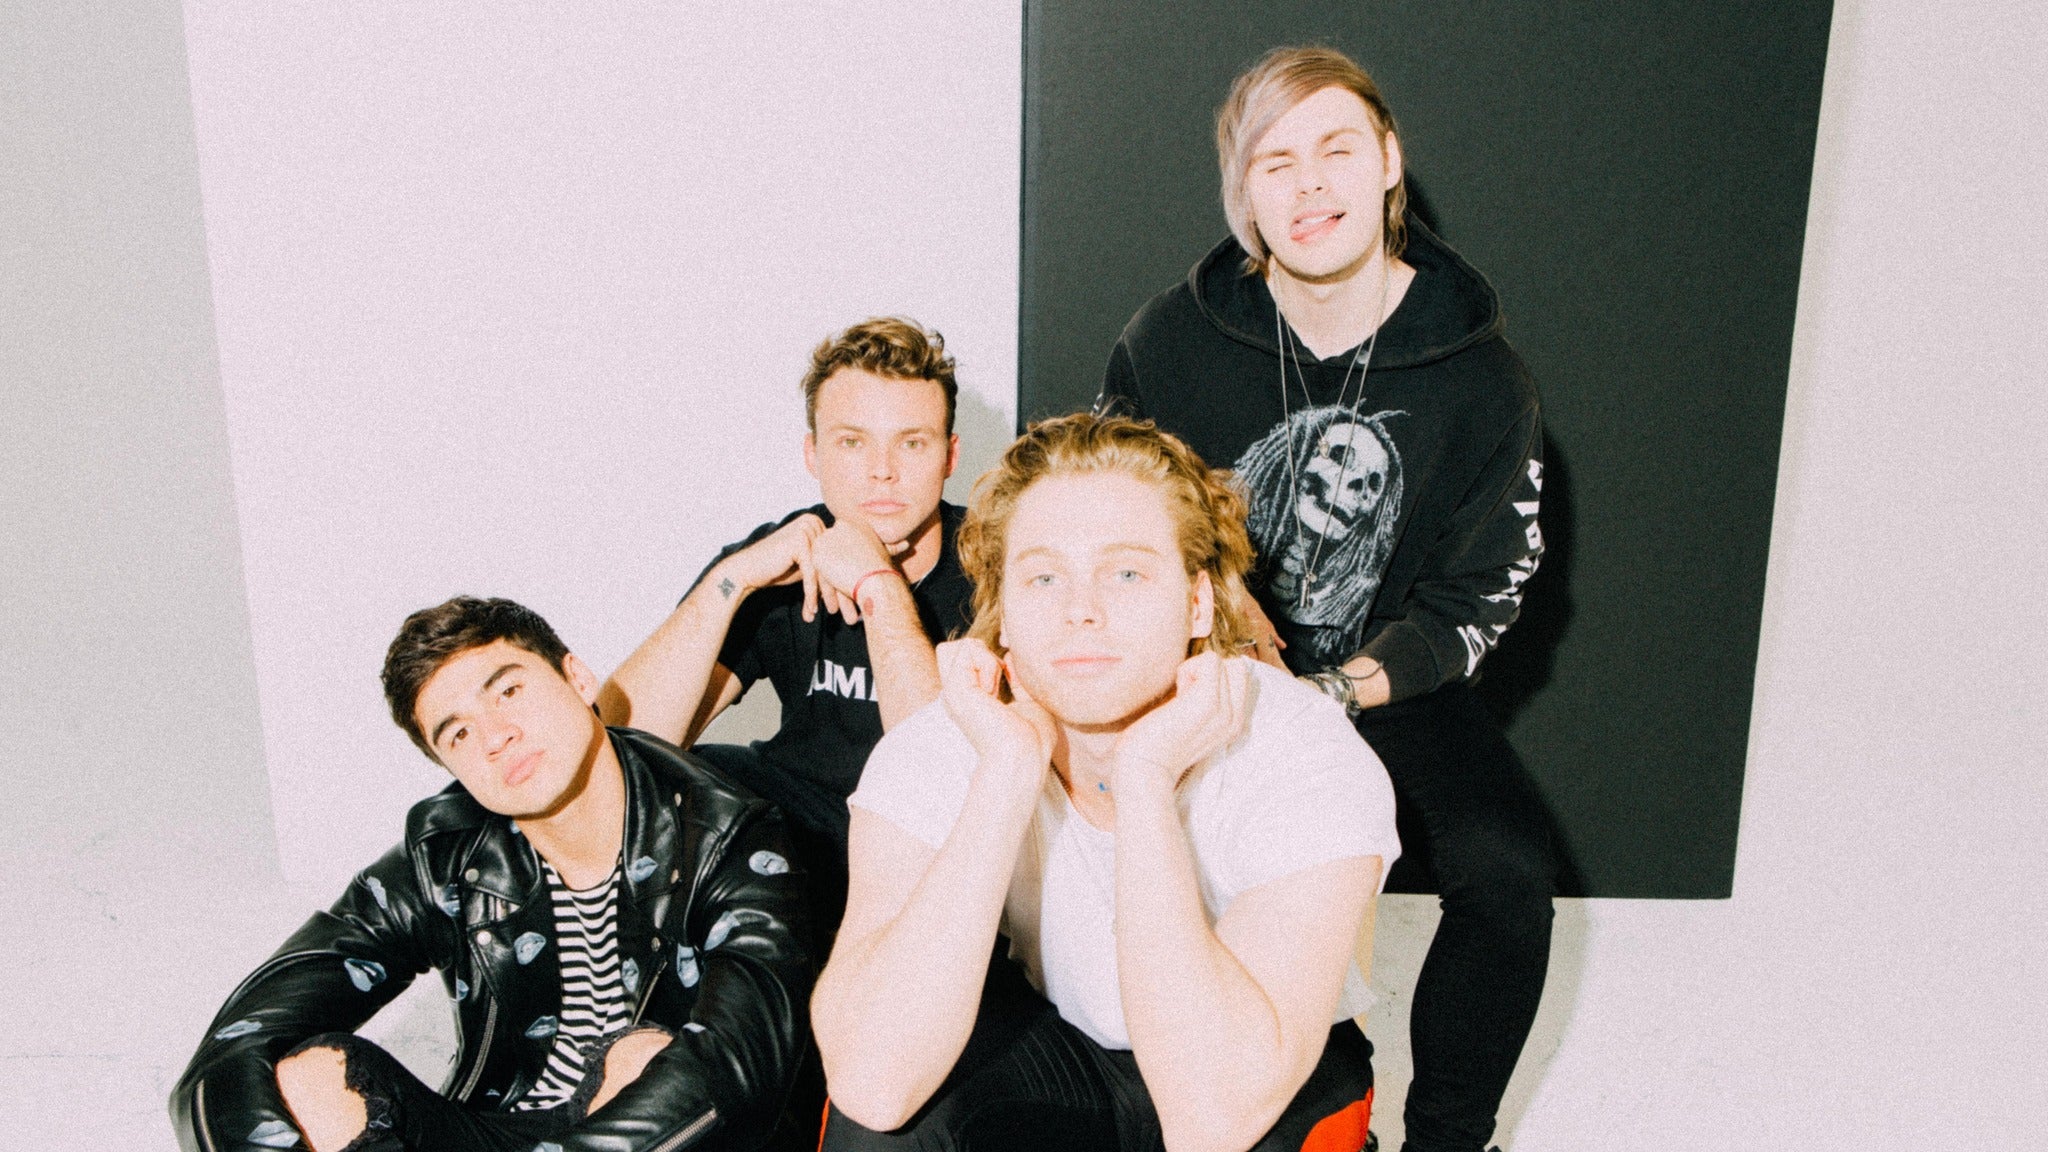 5 Seconds of Summer: Meet You There Tour in Holmdel promo photo for Official Platinum presale offer code